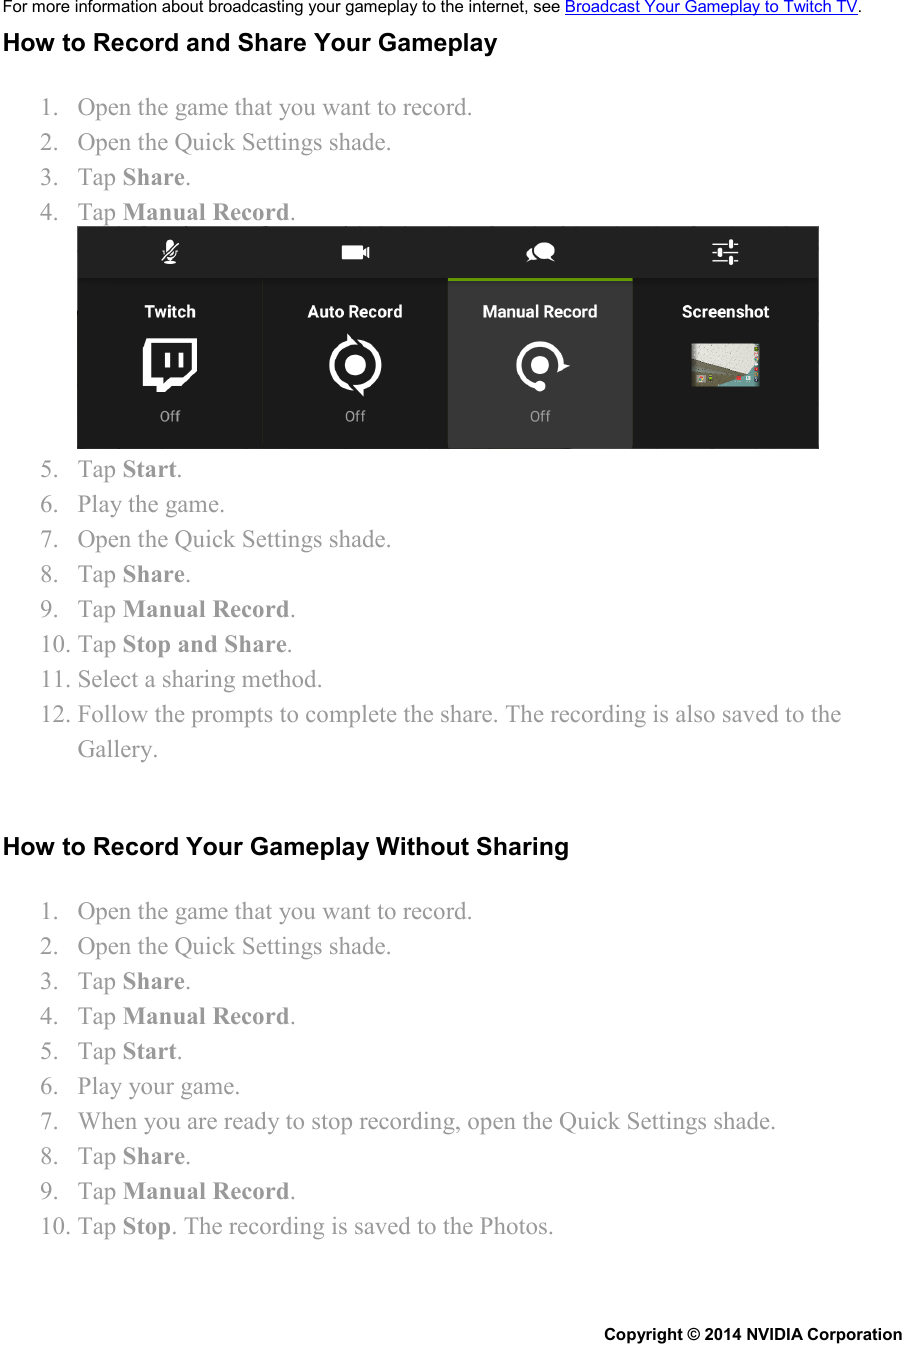 For more information about broadcasting your gameplay to the internet, see Broadcast Your Gameplay to Twitch TV. How to Record and Share Your Gameplay 1. Open the game that you want to record. 2. Open the Quick Settings shade. 3. Tap Share. 4. Tap Manual Record.  5. Tap Start. 6. Play the game. 7. Open the Quick Settings shade. 8. Tap Share. 9. Tap Manual Record. 10. Tap Stop and Share. 11. Select a sharing method. 12. Follow the prompts to complete the share. The recording is also saved to the Gallery.   How to Record Your Gameplay Without Sharing 1. Open the game that you want to record. 2. Open the Quick Settings shade. 3. Tap Share. 4. Tap Manual Record. 5. Tap Start. 6. Play your game. 7. When you are ready to stop recording, open the Quick Settings shade. 8. Tap Share. 9. Tap Manual Record. 10. Tap Stop. The recording is saved to the Photos.   Copyright © 2014 NVIDIA Corporation   